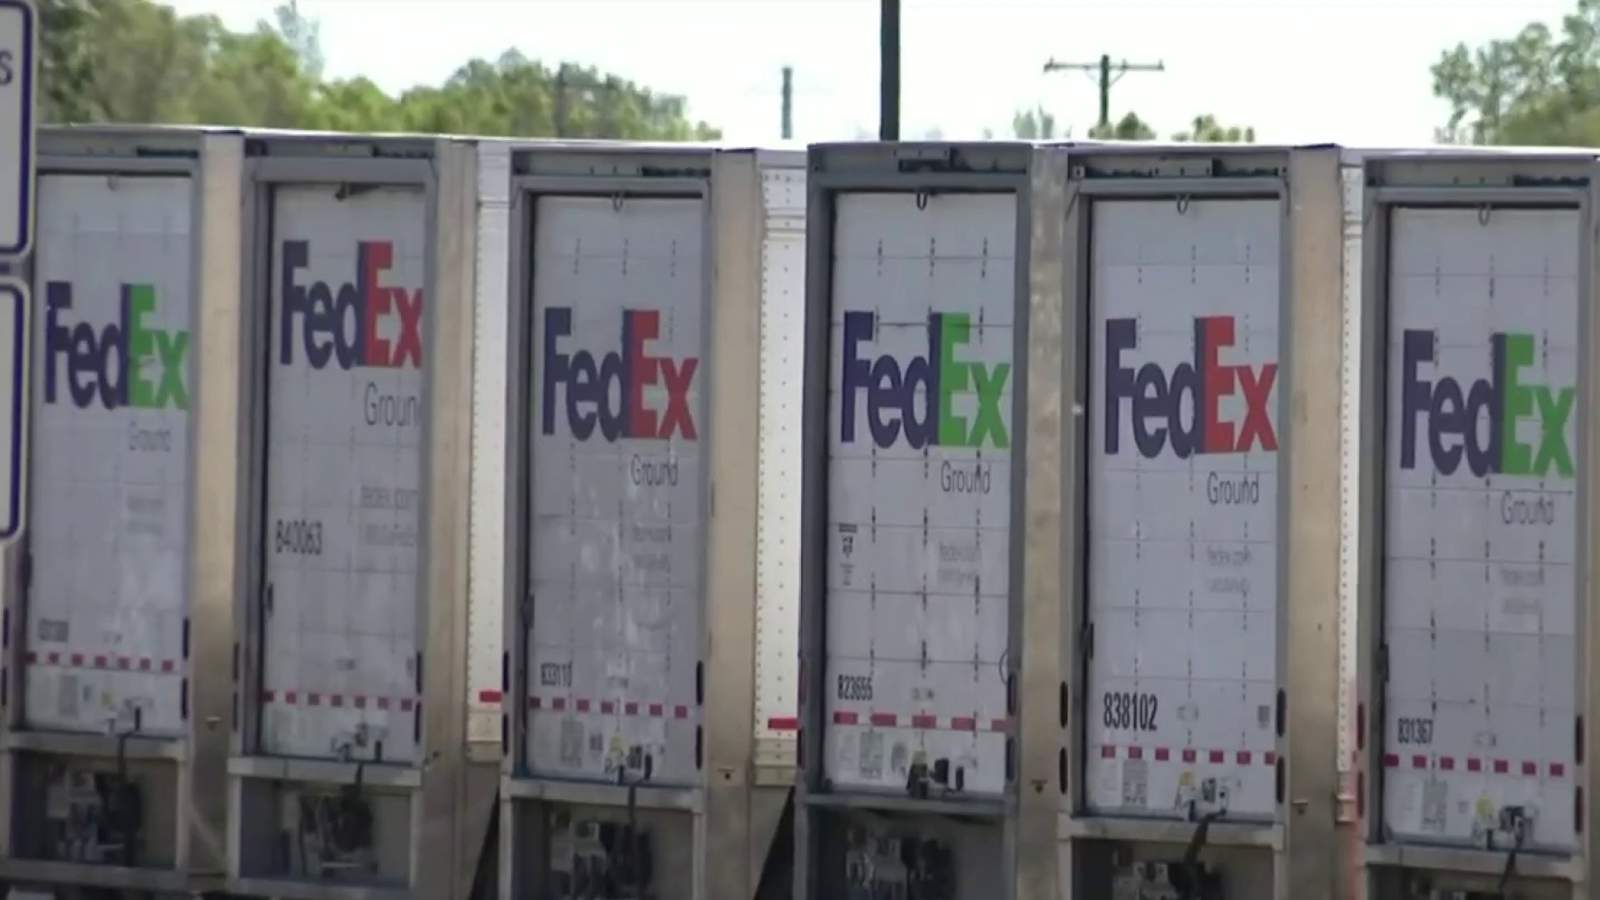 Oak Park FedEx facility struggles to mail out packages, residents say